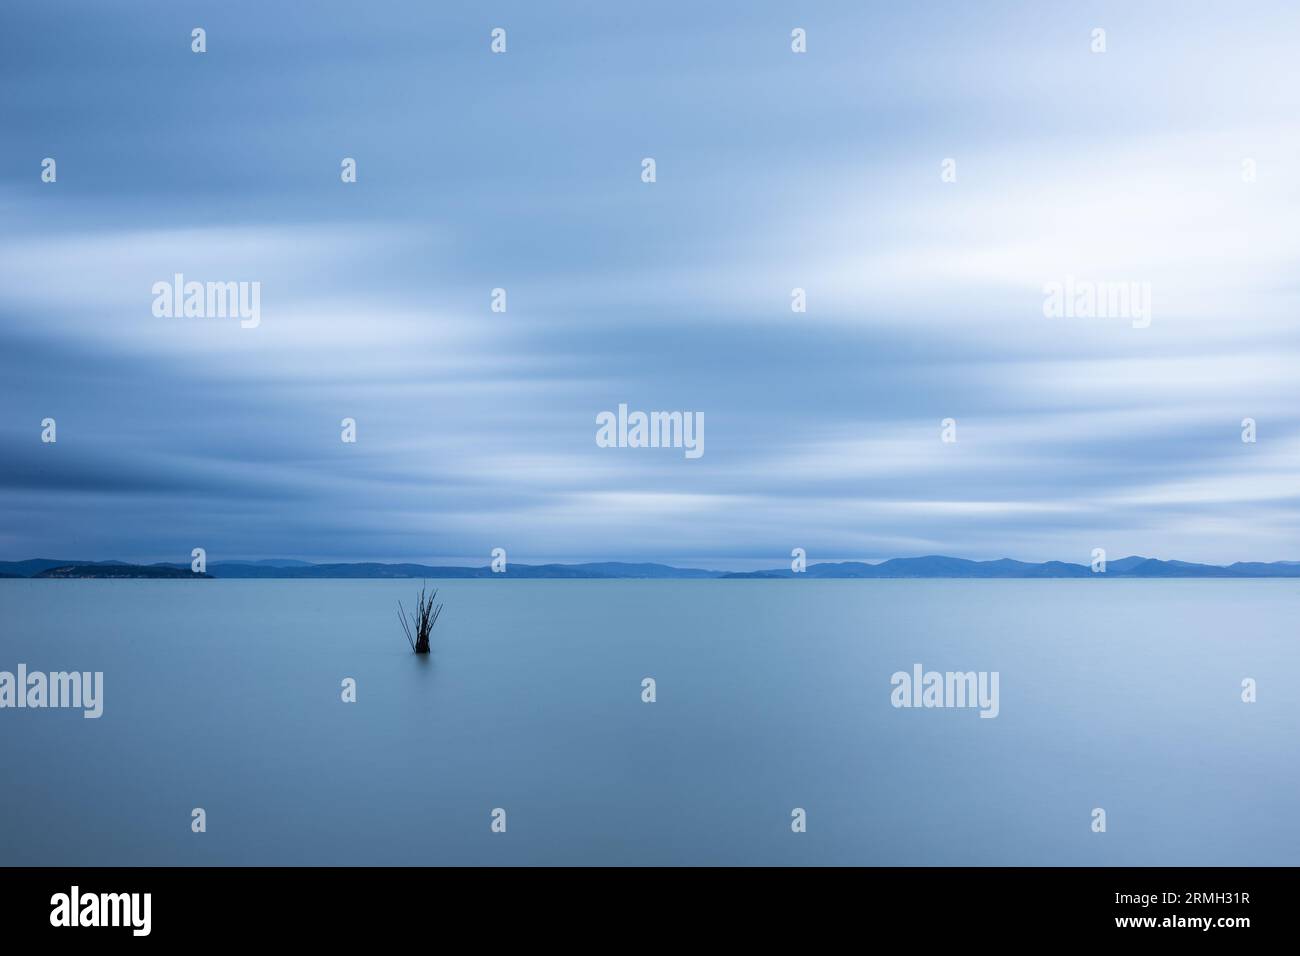 https://c8.alamy.com/comp/2RMH31R/minimalist-view-of-fishing-net-poles-on-a-lake-with-perfectly-still-water-and-empty-sky-at-dusk-2RMH31R.jpg